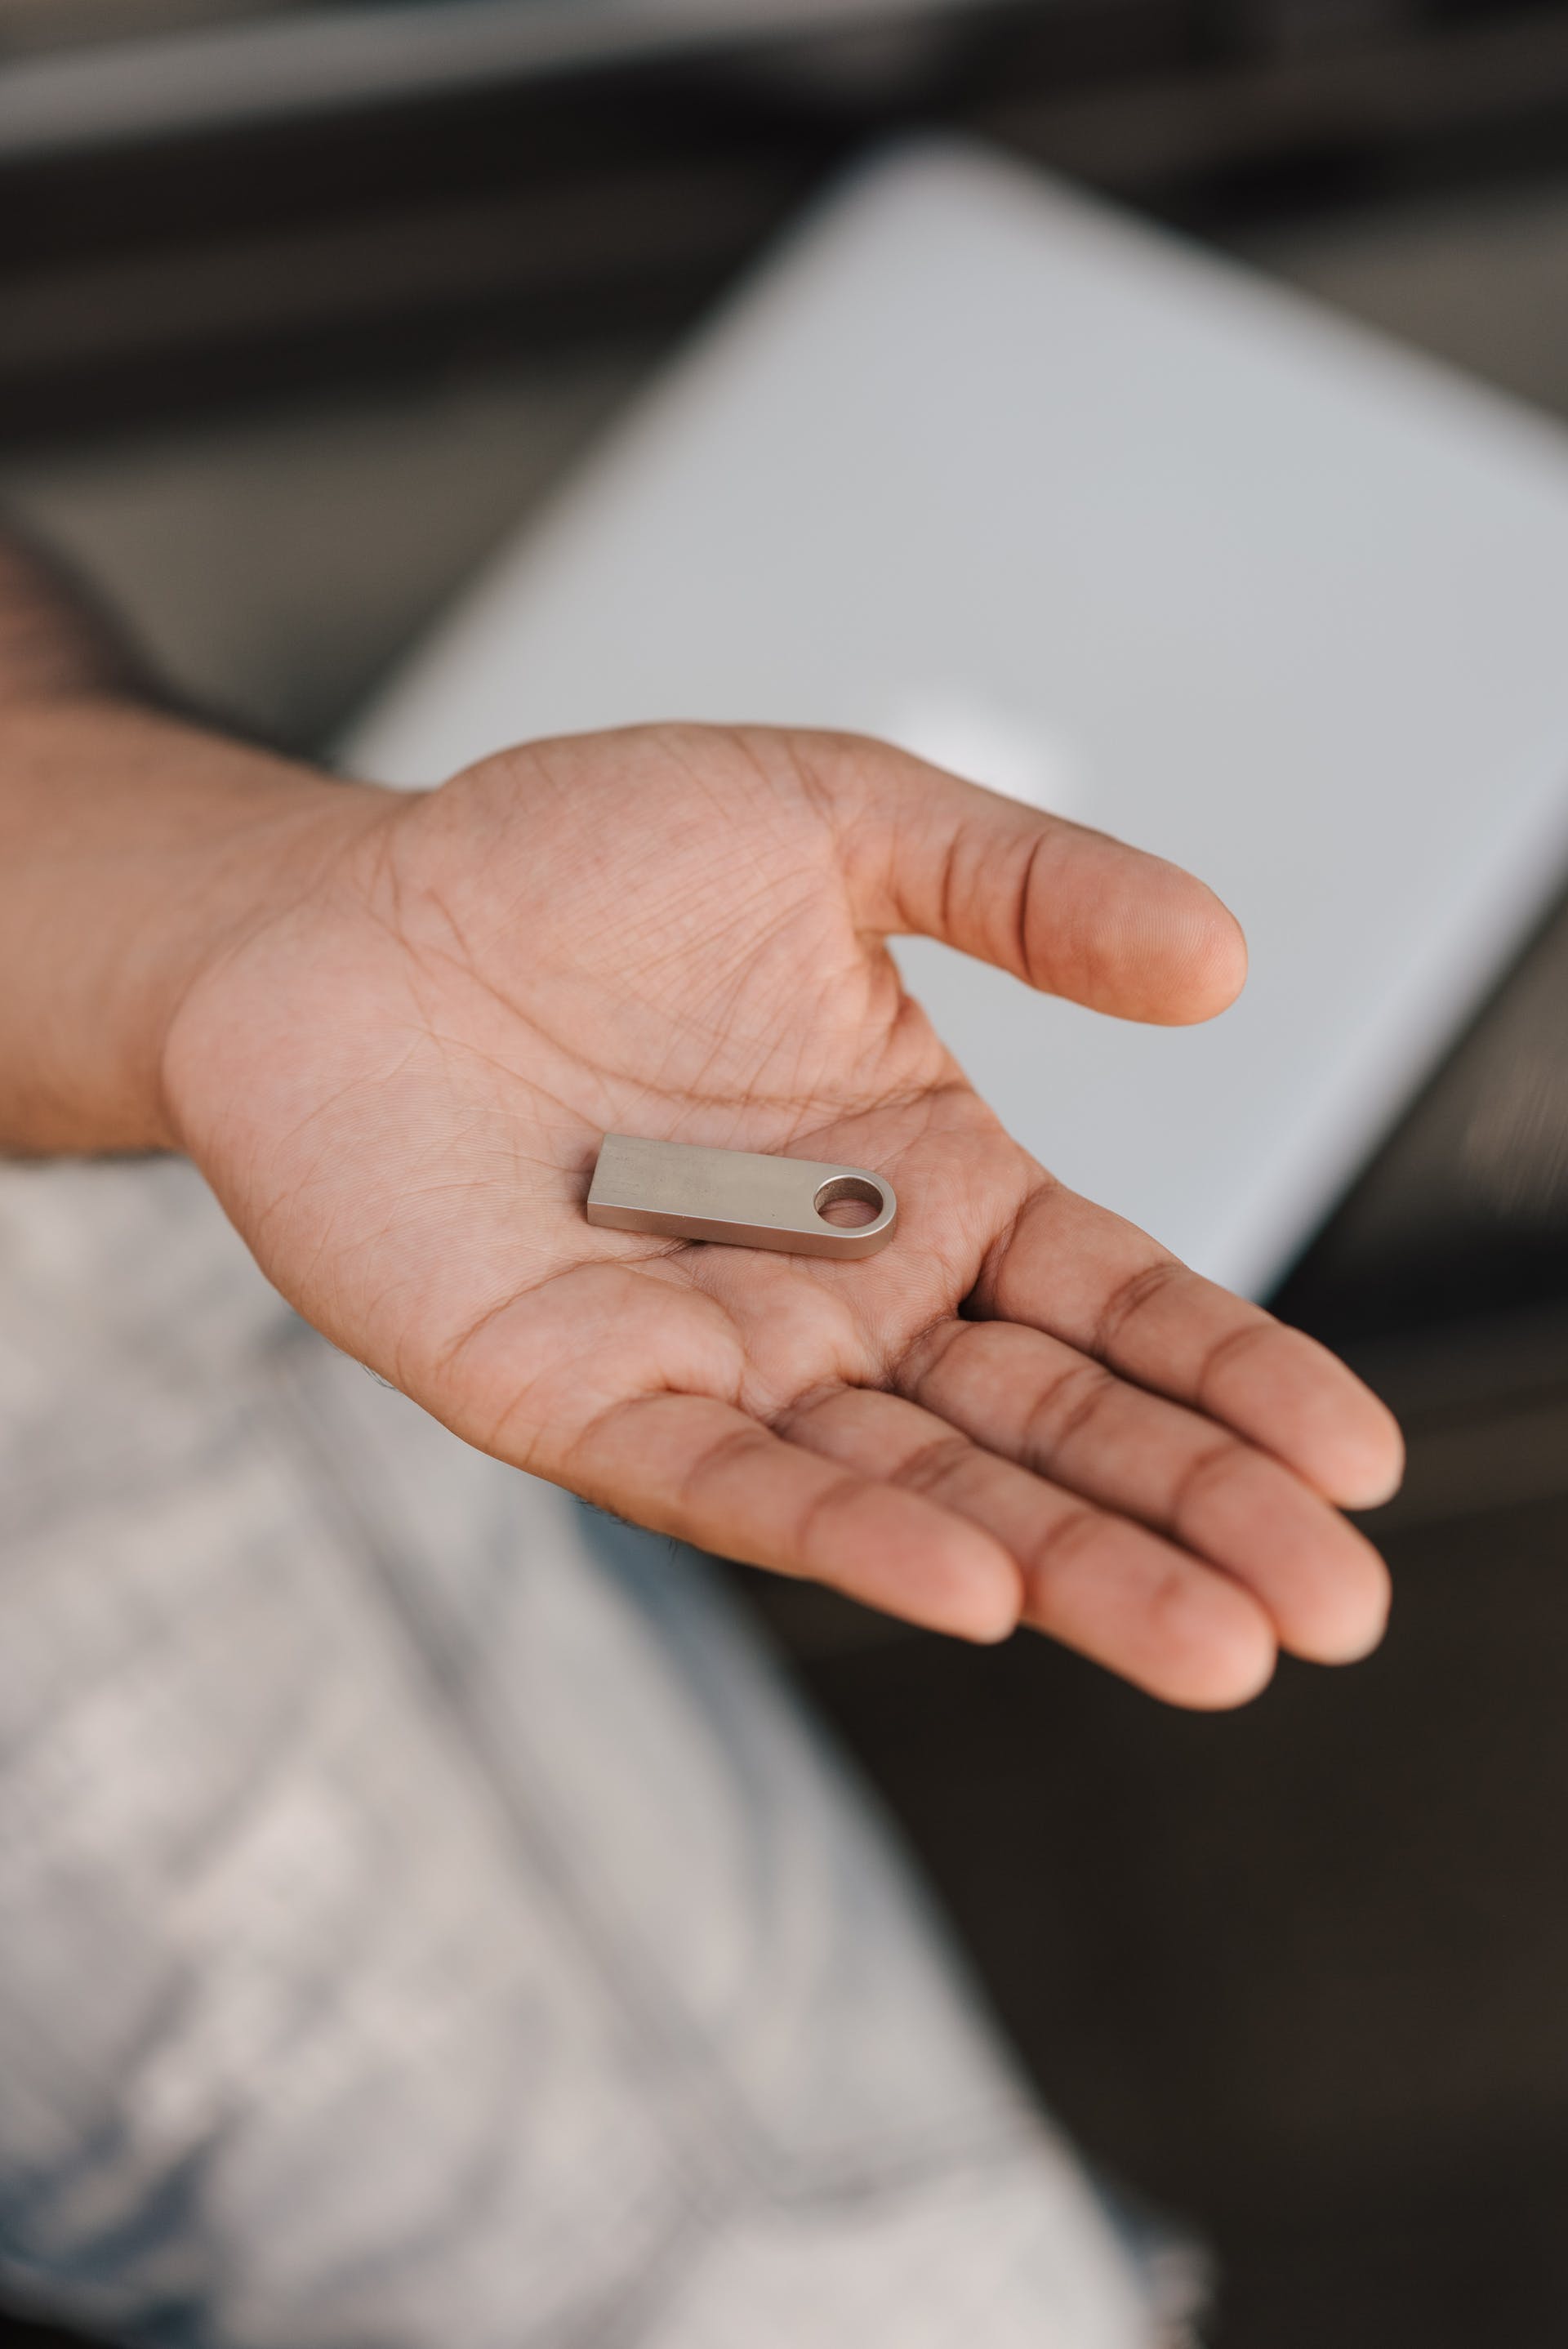 A person holding a USB drive | Source: Pexels